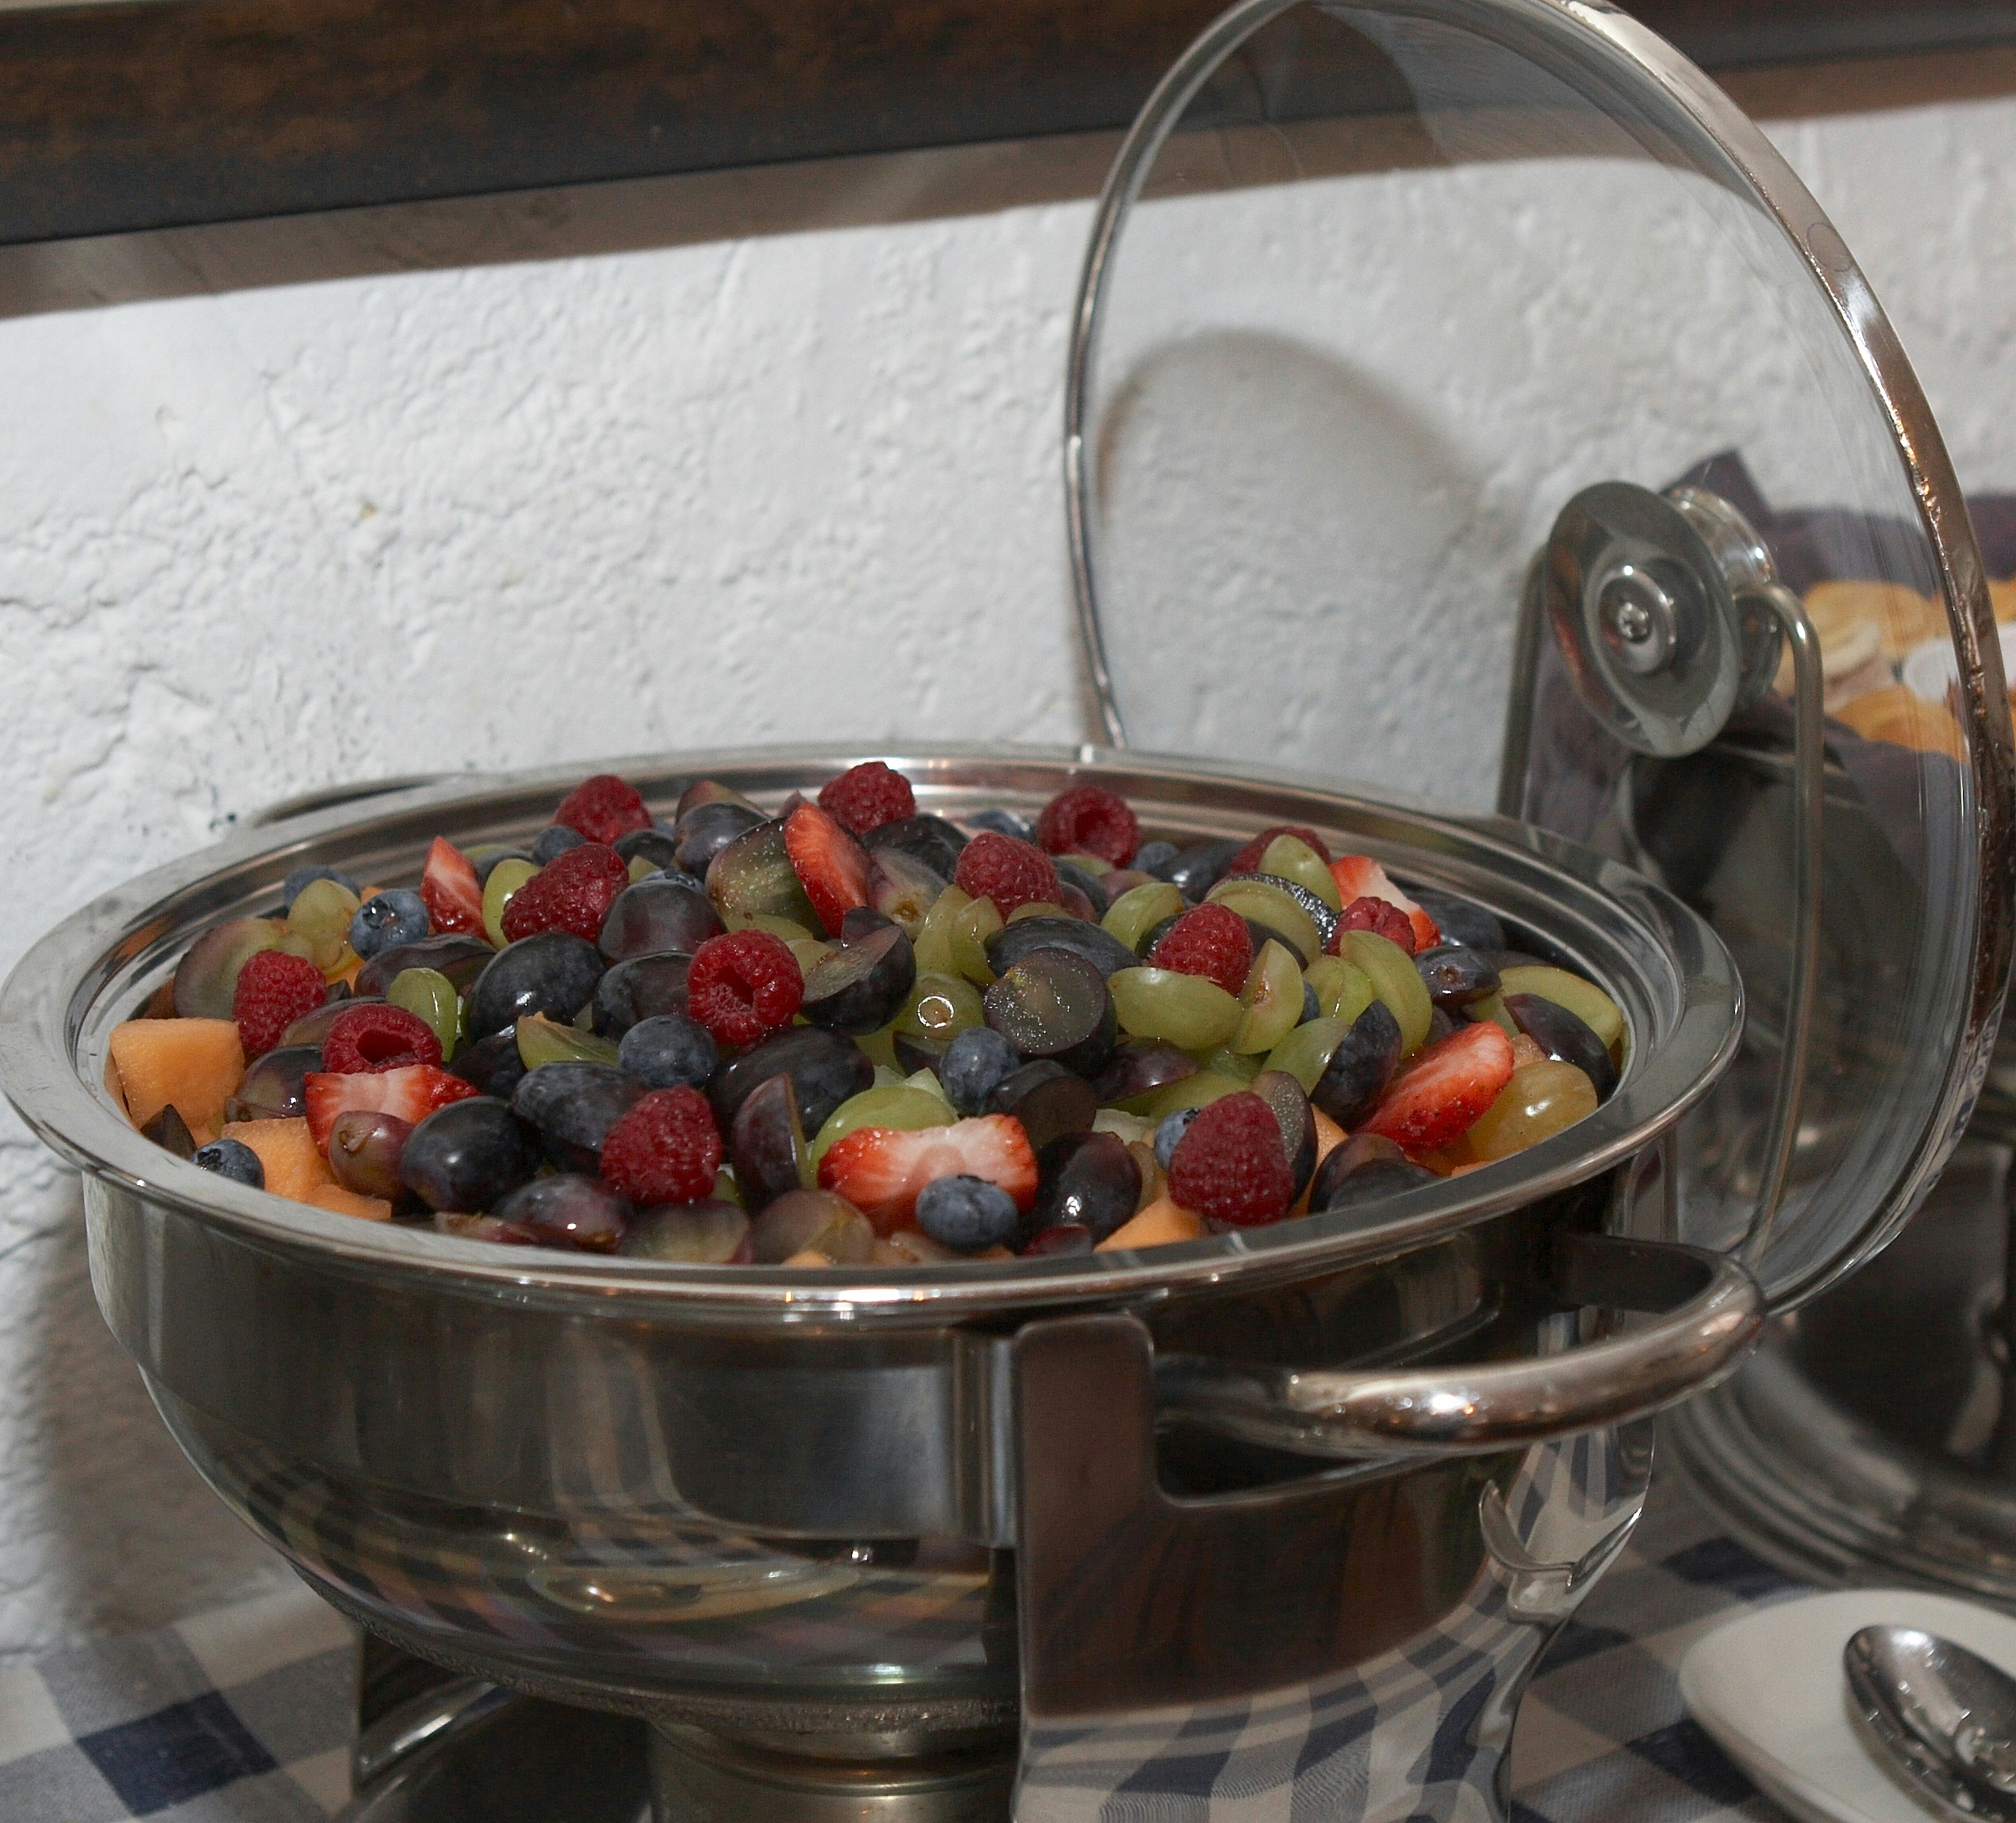 Grapes, raspberries and cantaloupe in a metal serving bowl with hinged clear lid